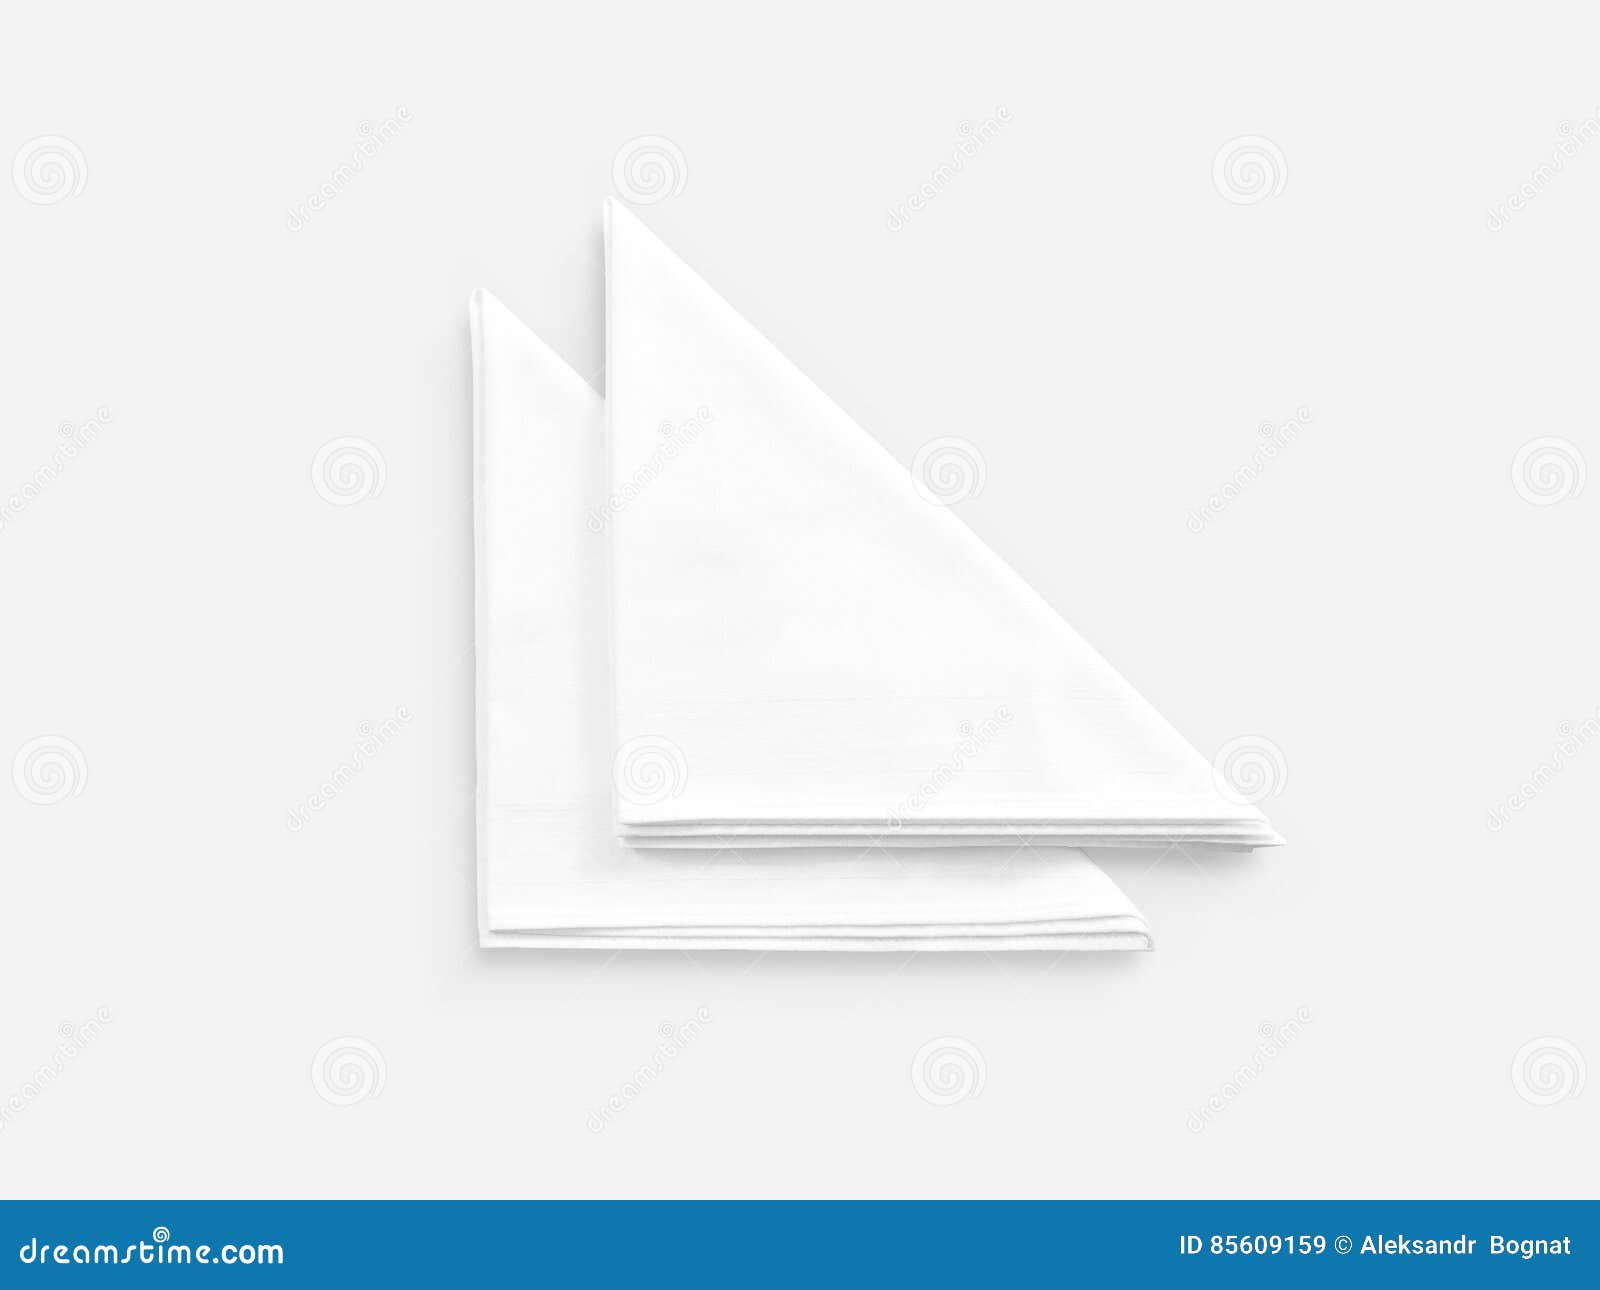 Download Blank White Restaurant Napkin Mock Up Isolated Stock Image Image Of Clear Folded 85609159